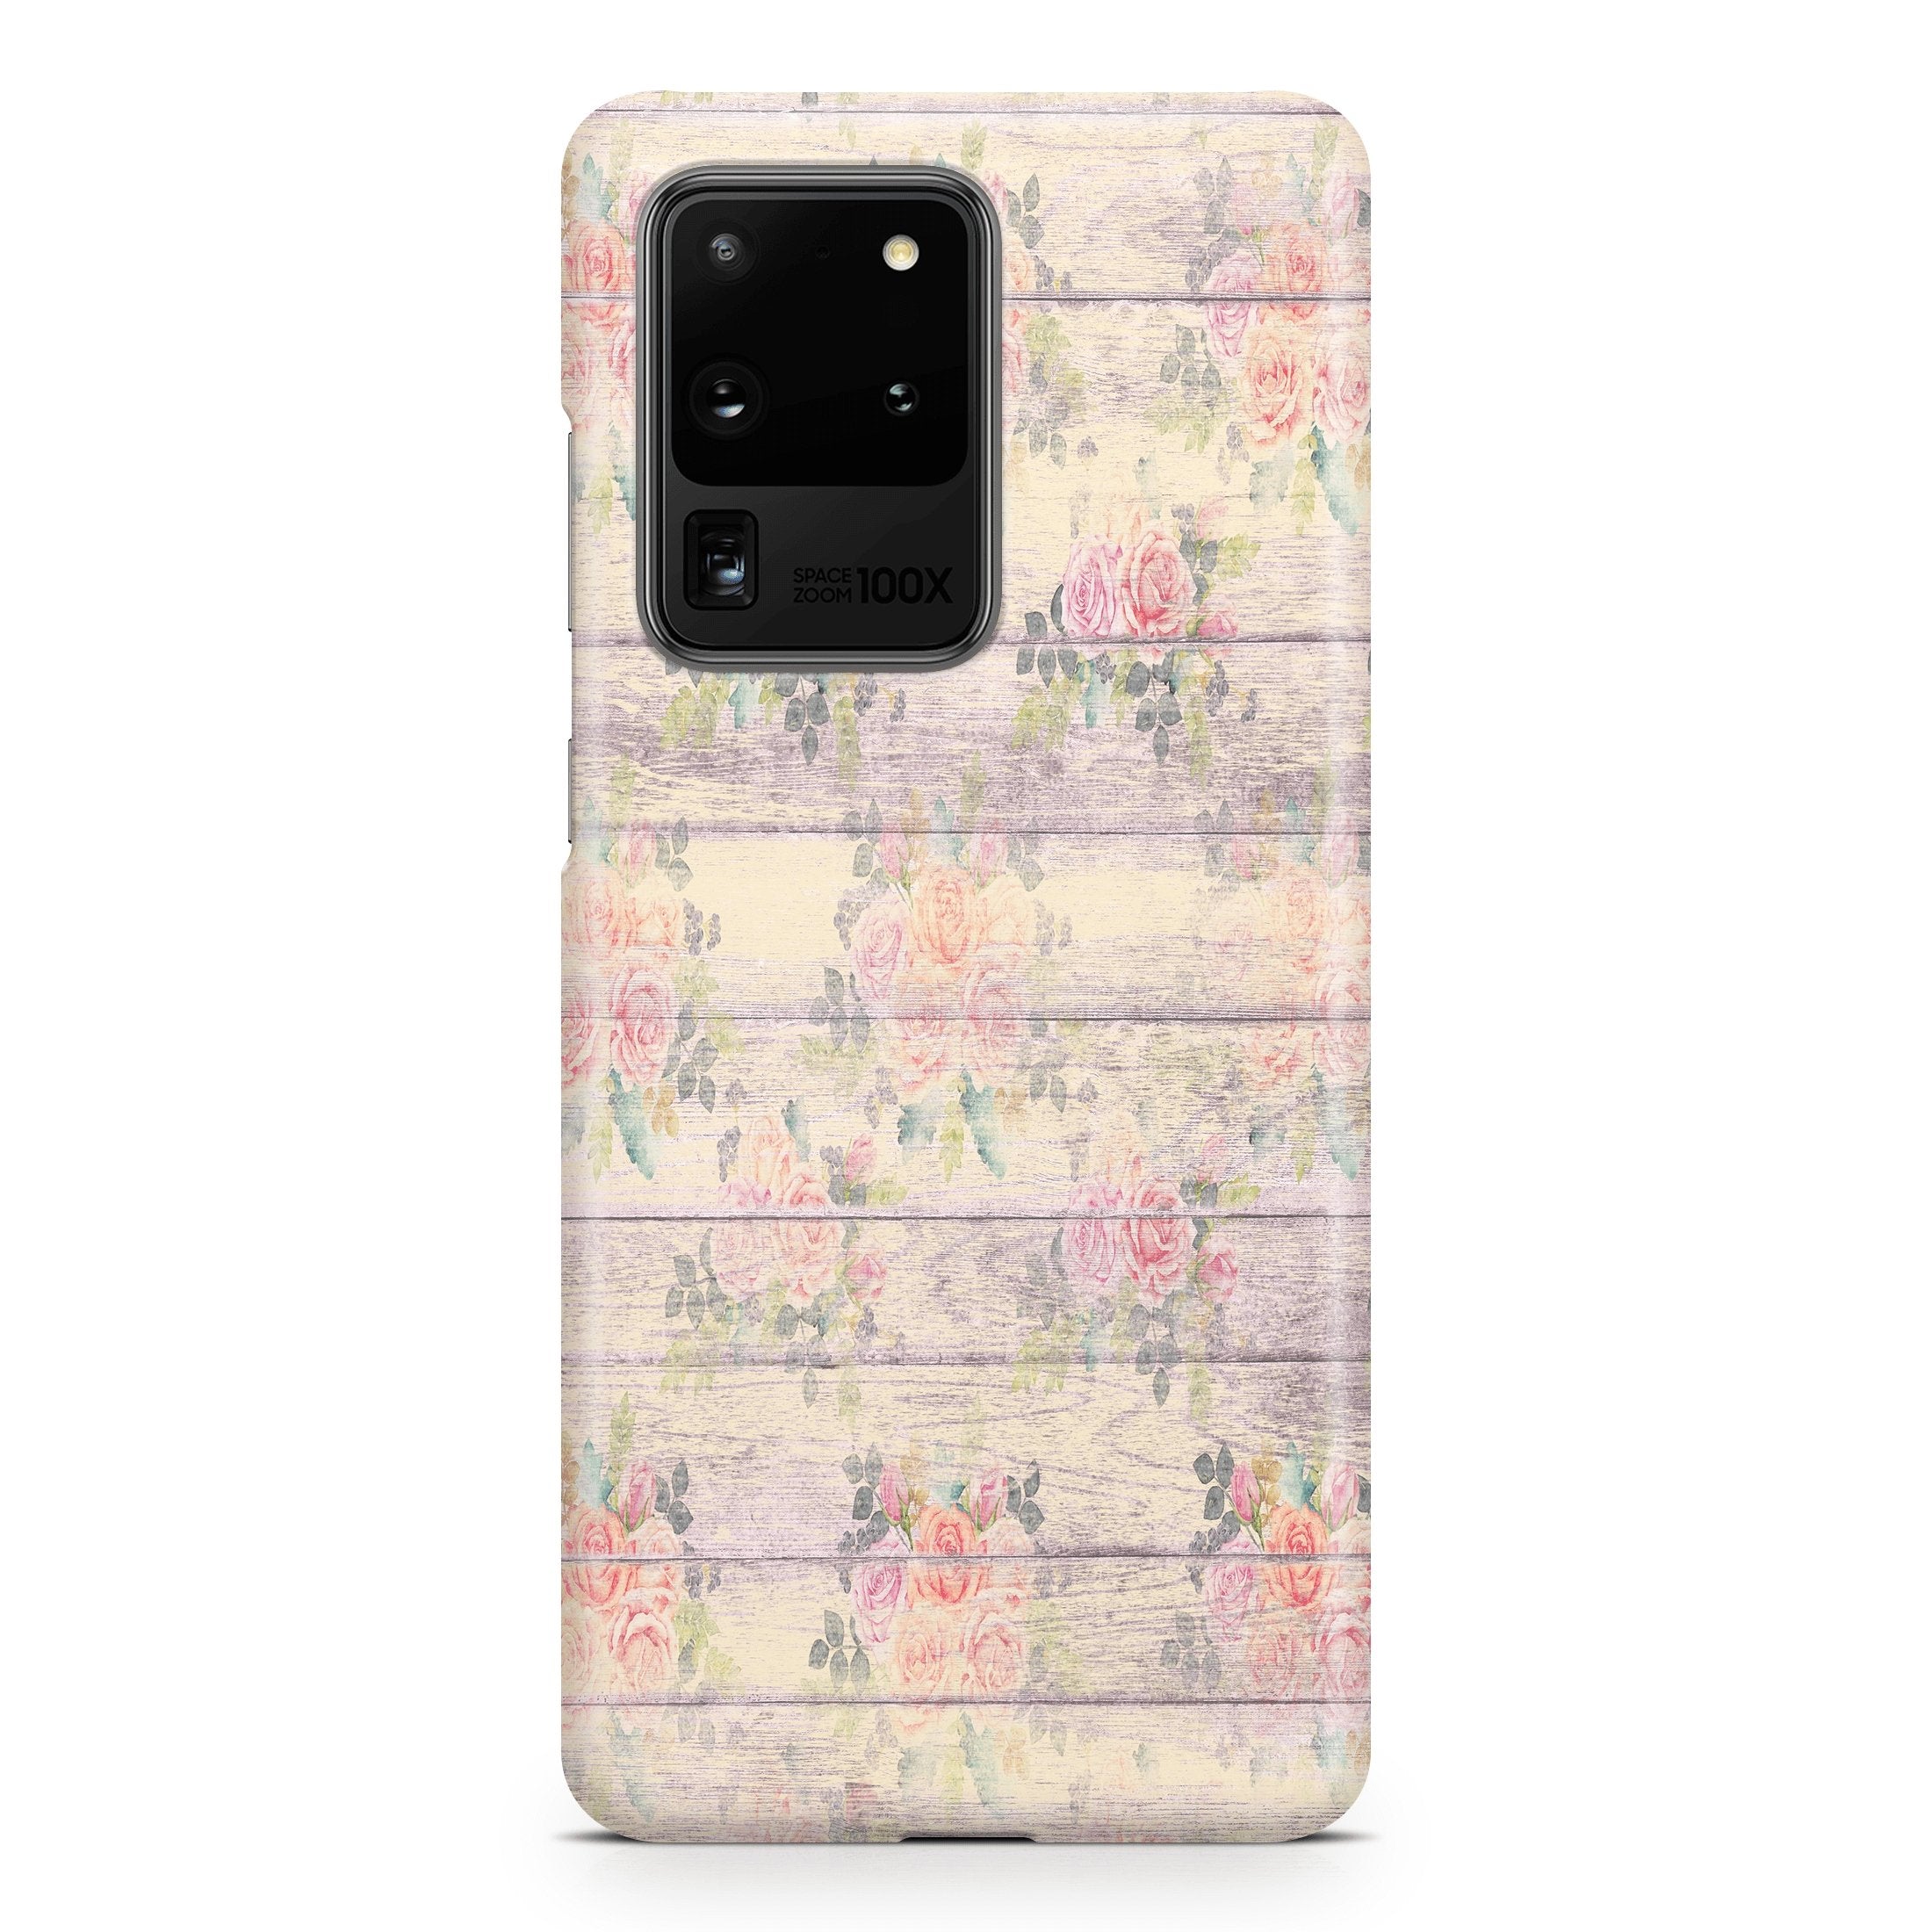 Shabby Chic Rosewood - Samsung phone case designs by CaseSwagger